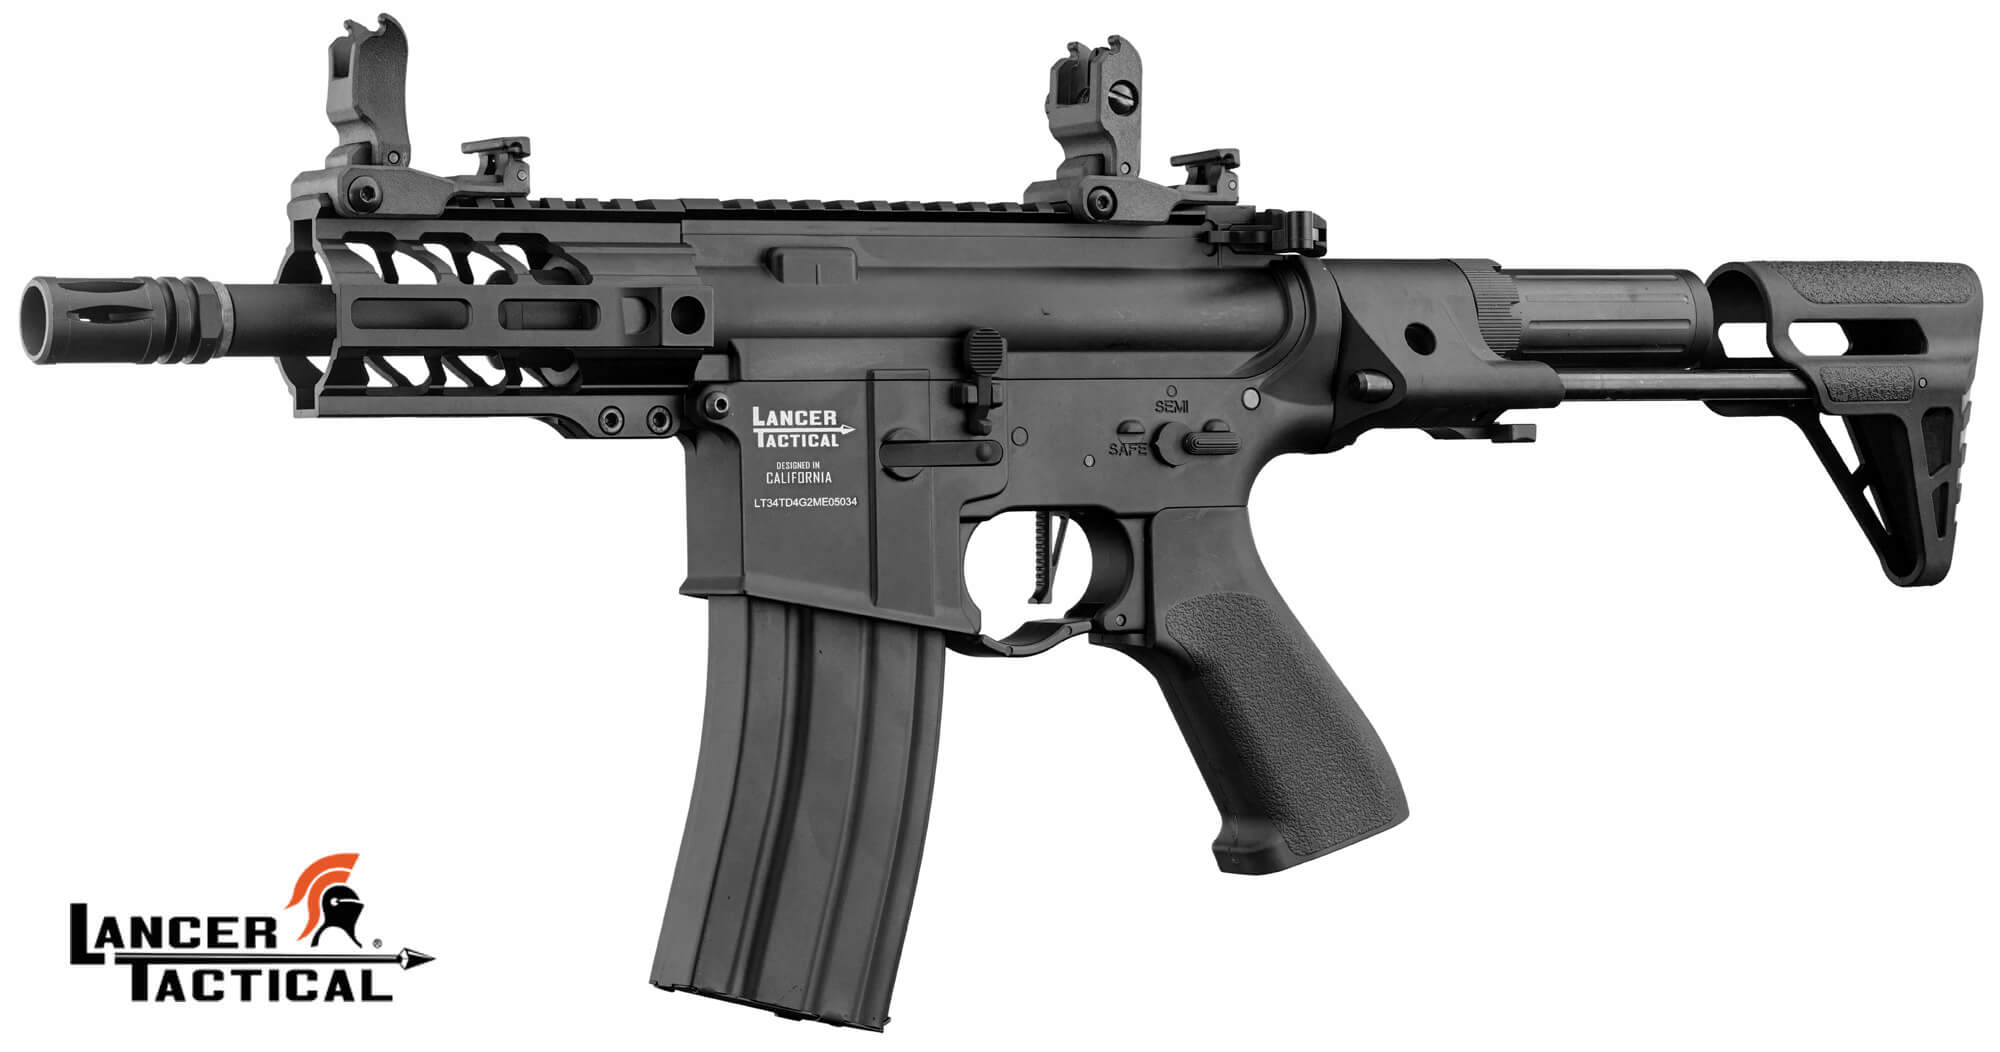 The Pro Line generation 2 series of Lancer Tactical is among the most advan...